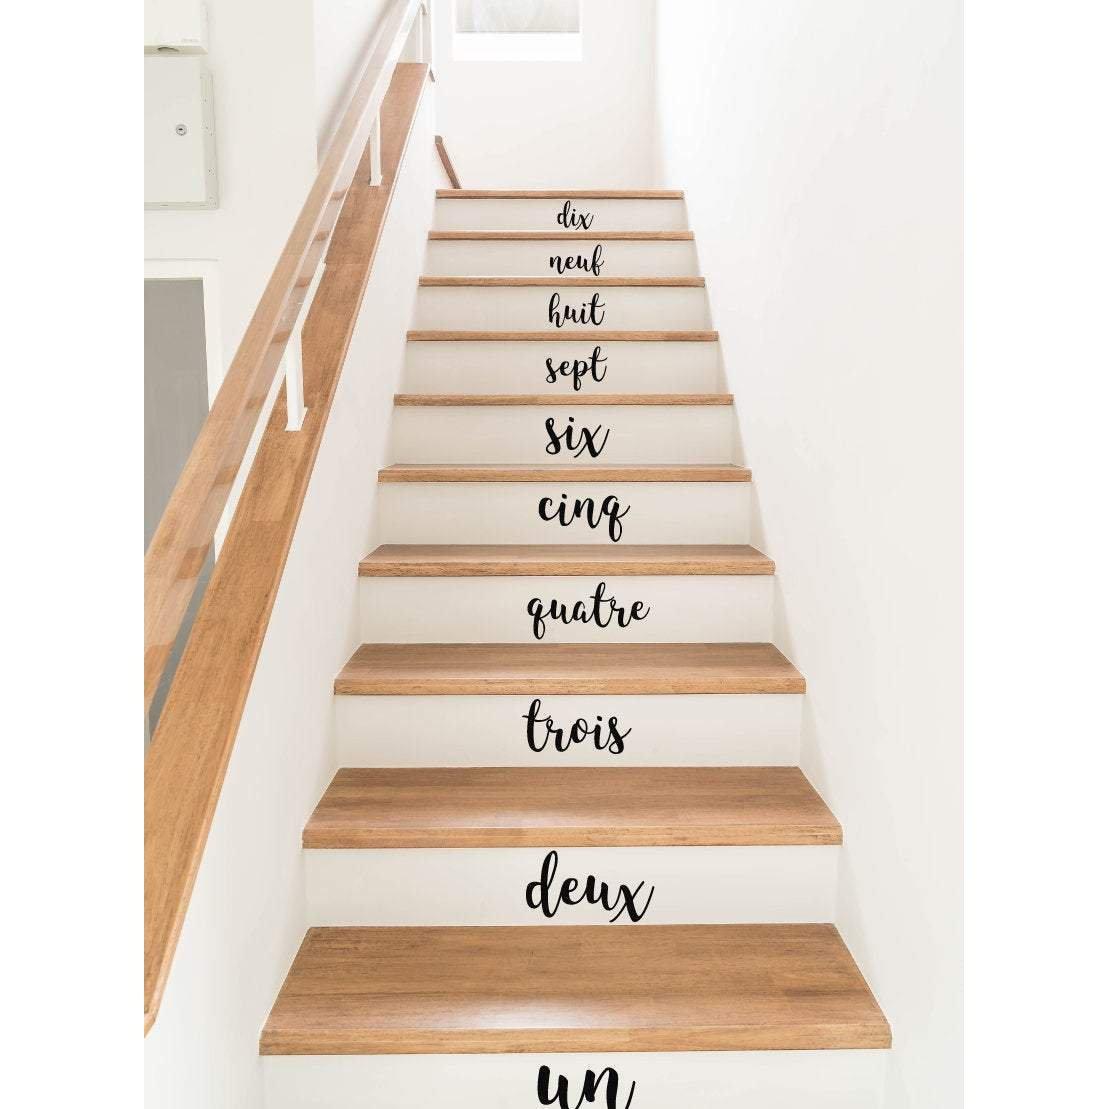 Stair Stickers, Stair Decals, Stair Riser Decals, Stair Riser Stickers, French, French Numbers, 1-10, Stair Numbers, French Wall Decals, 390